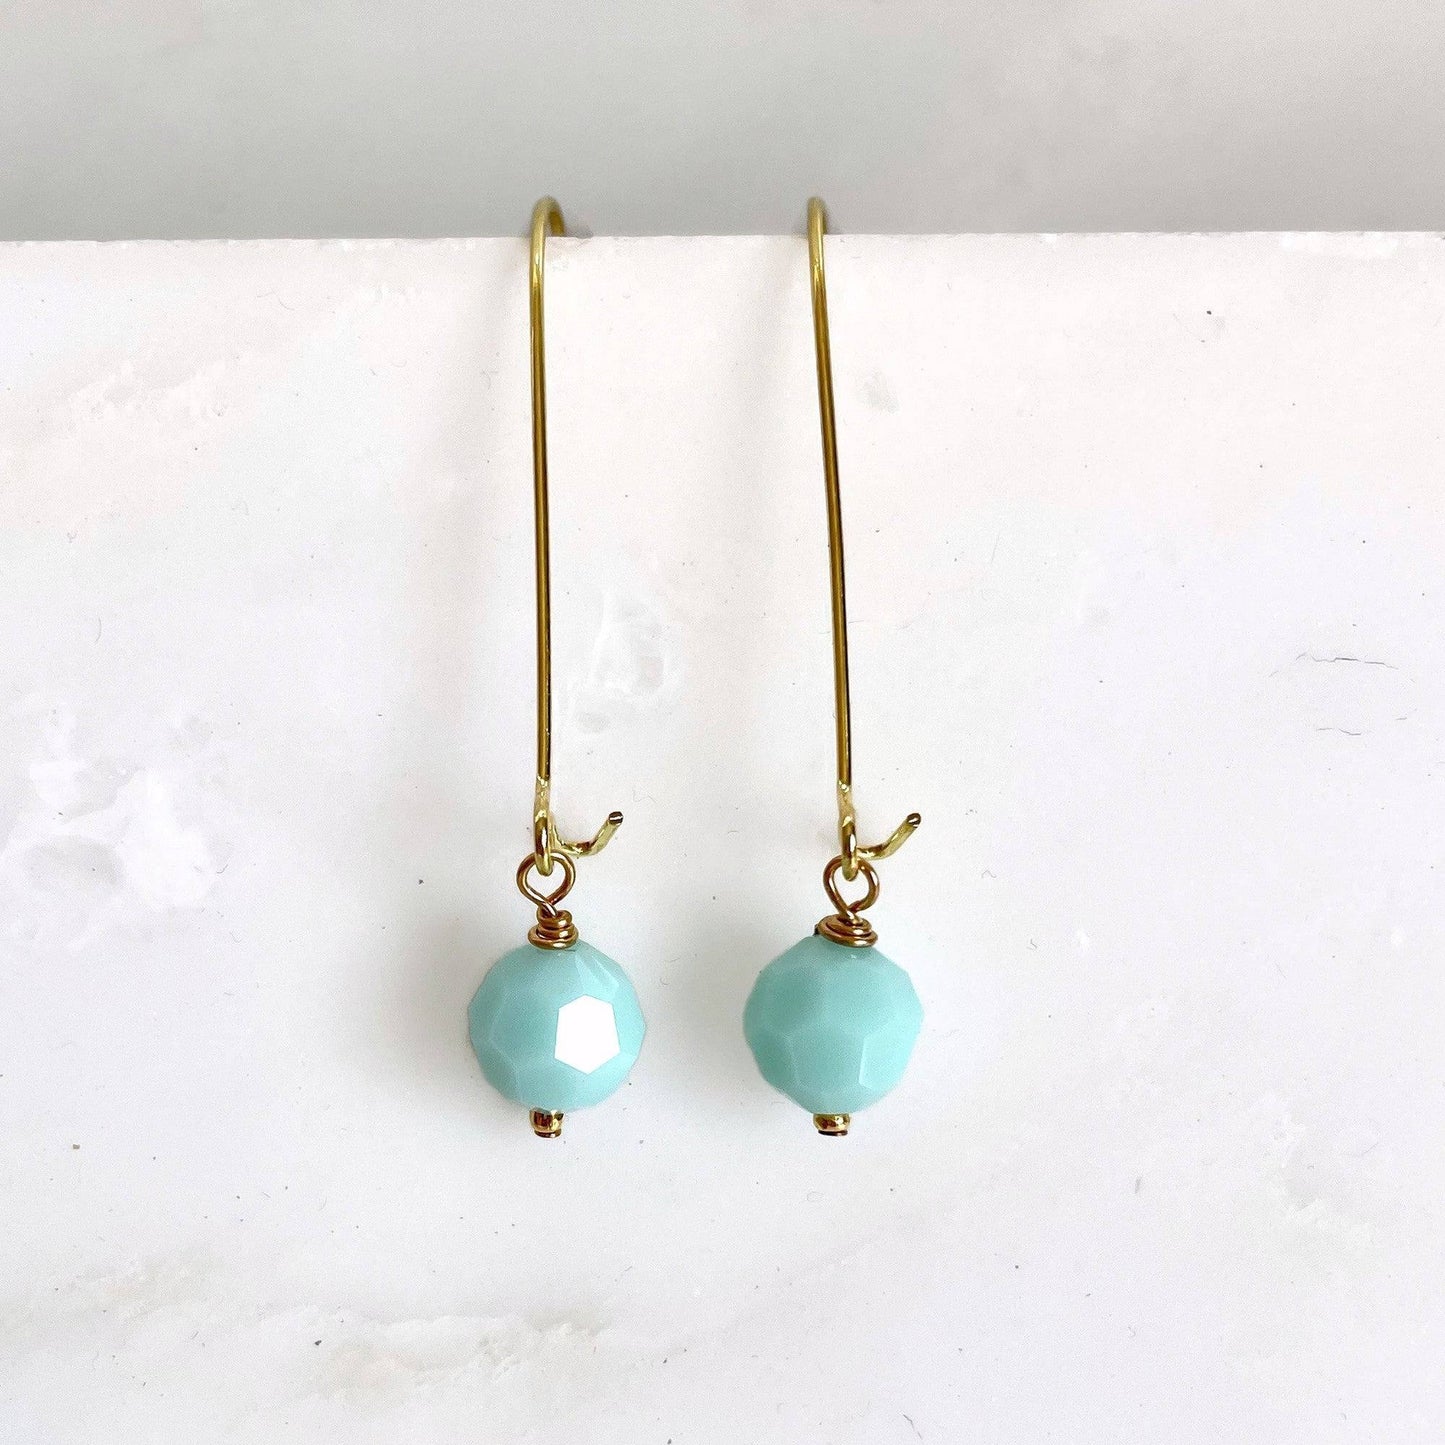 Mint green round crystal earrings